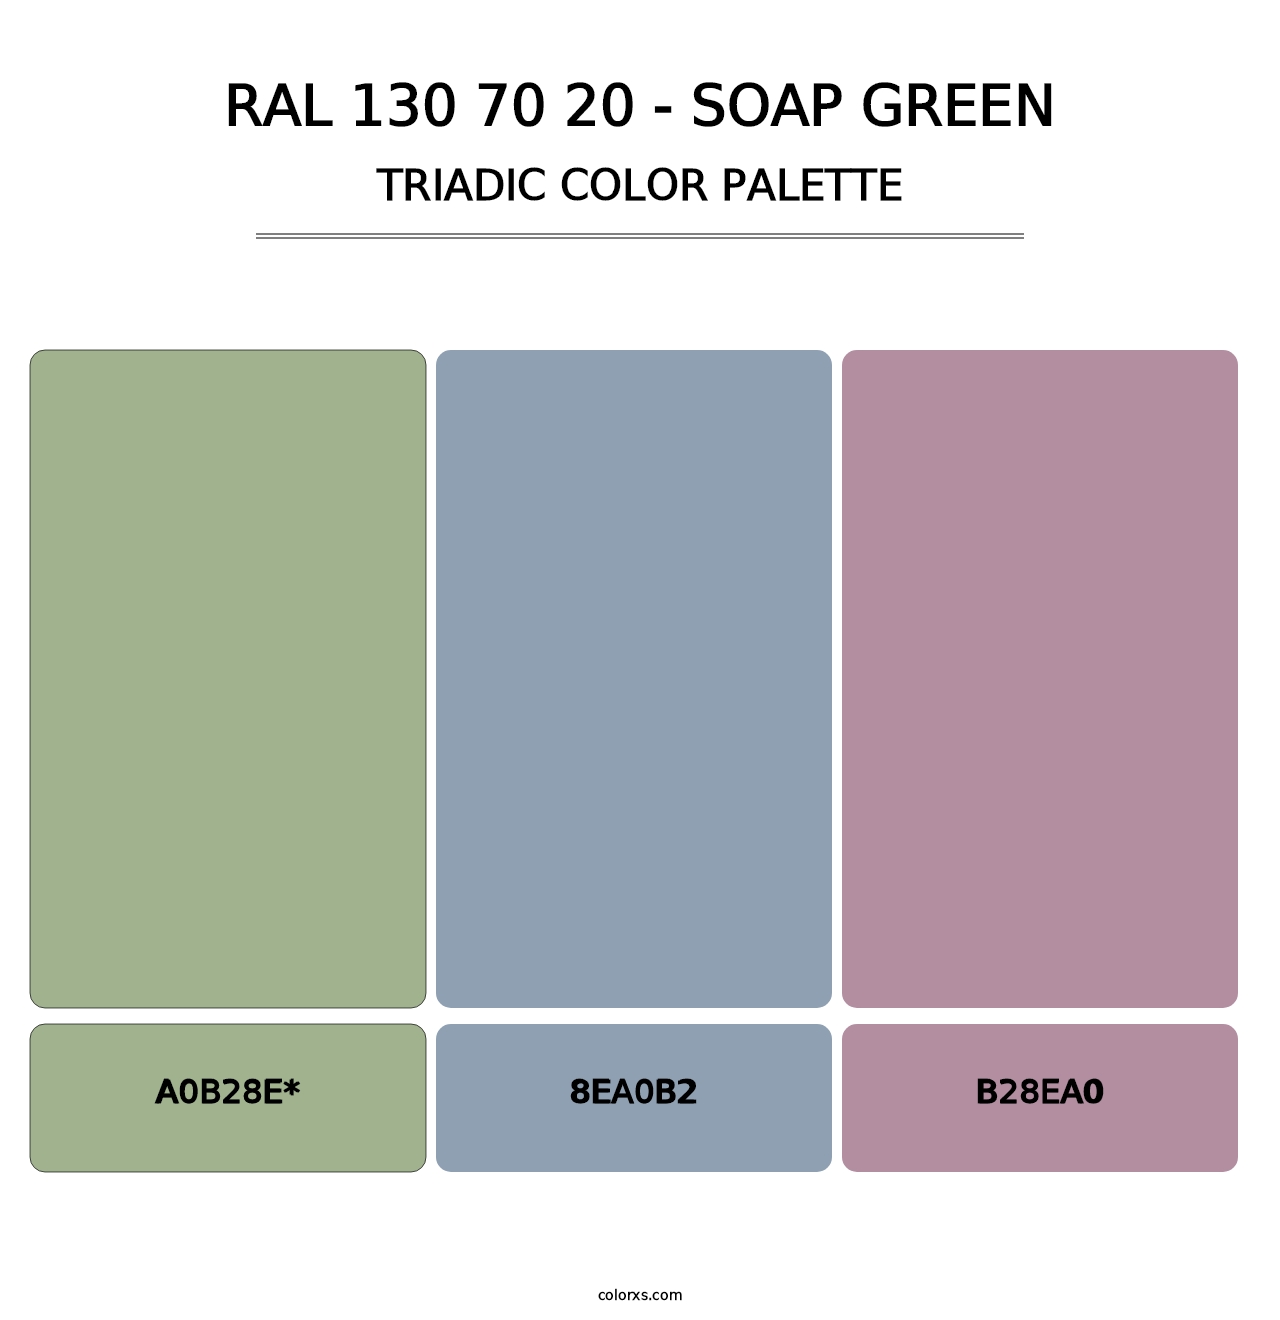 RAL 130 70 20 - Soap Green - Triadic Color Palette